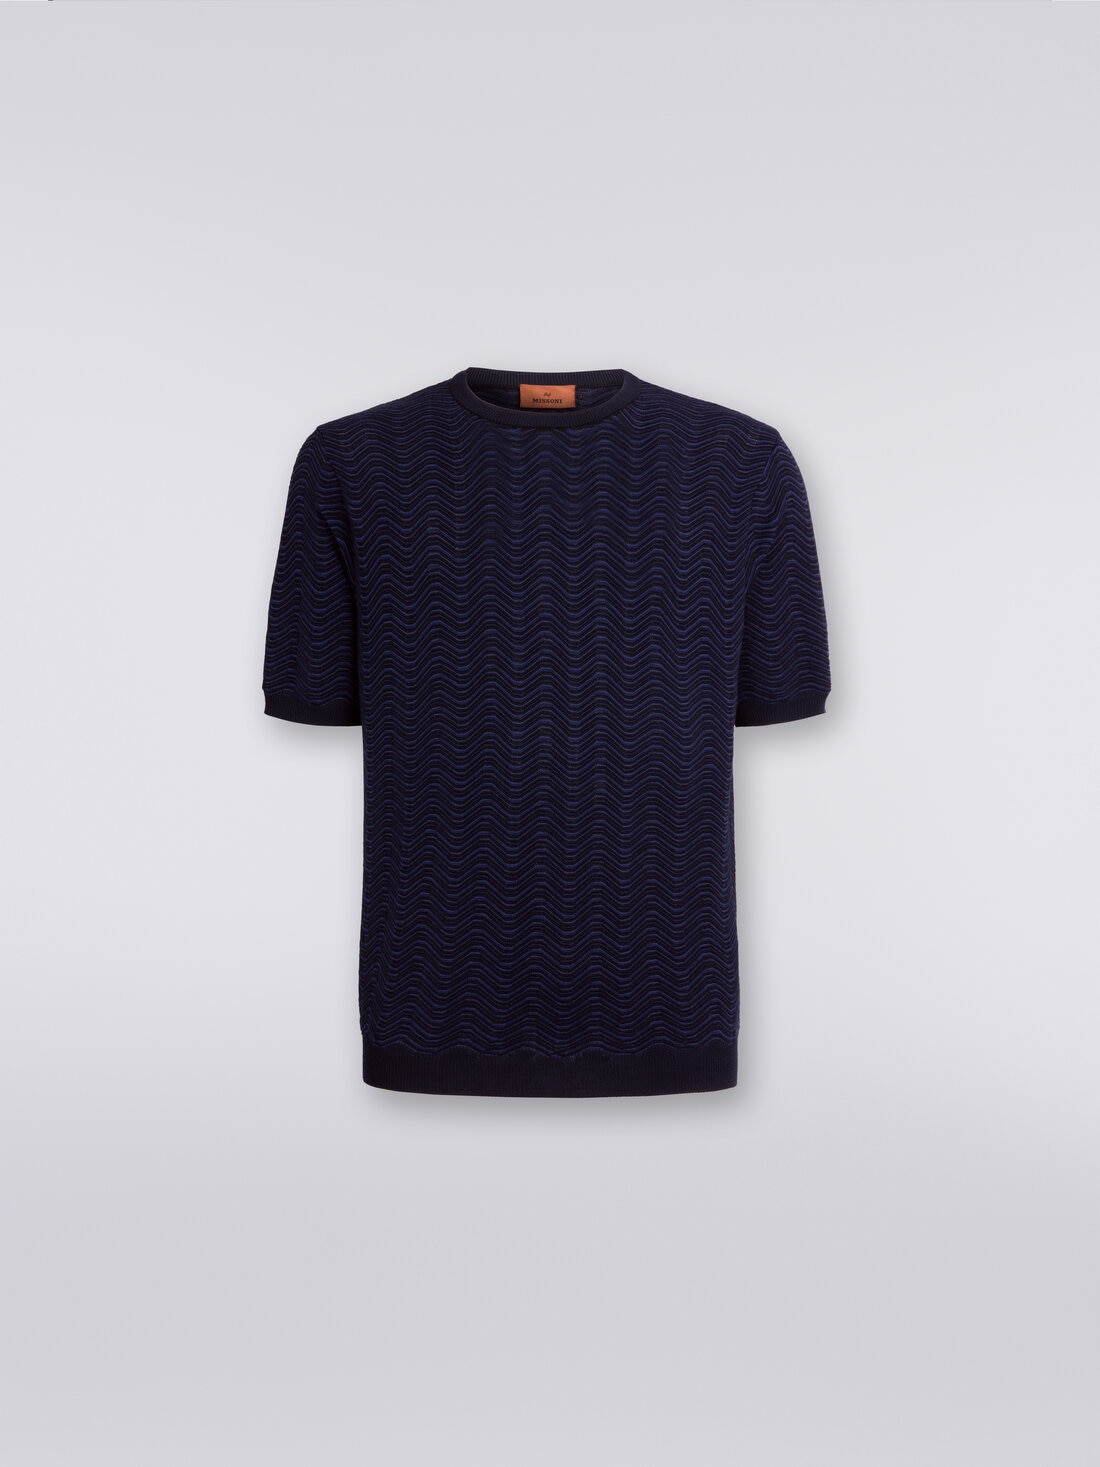 Wool and viscose crew-neck T-shirt with wave pattern, Blue - US23WN0ZBK035LS72FO - 0